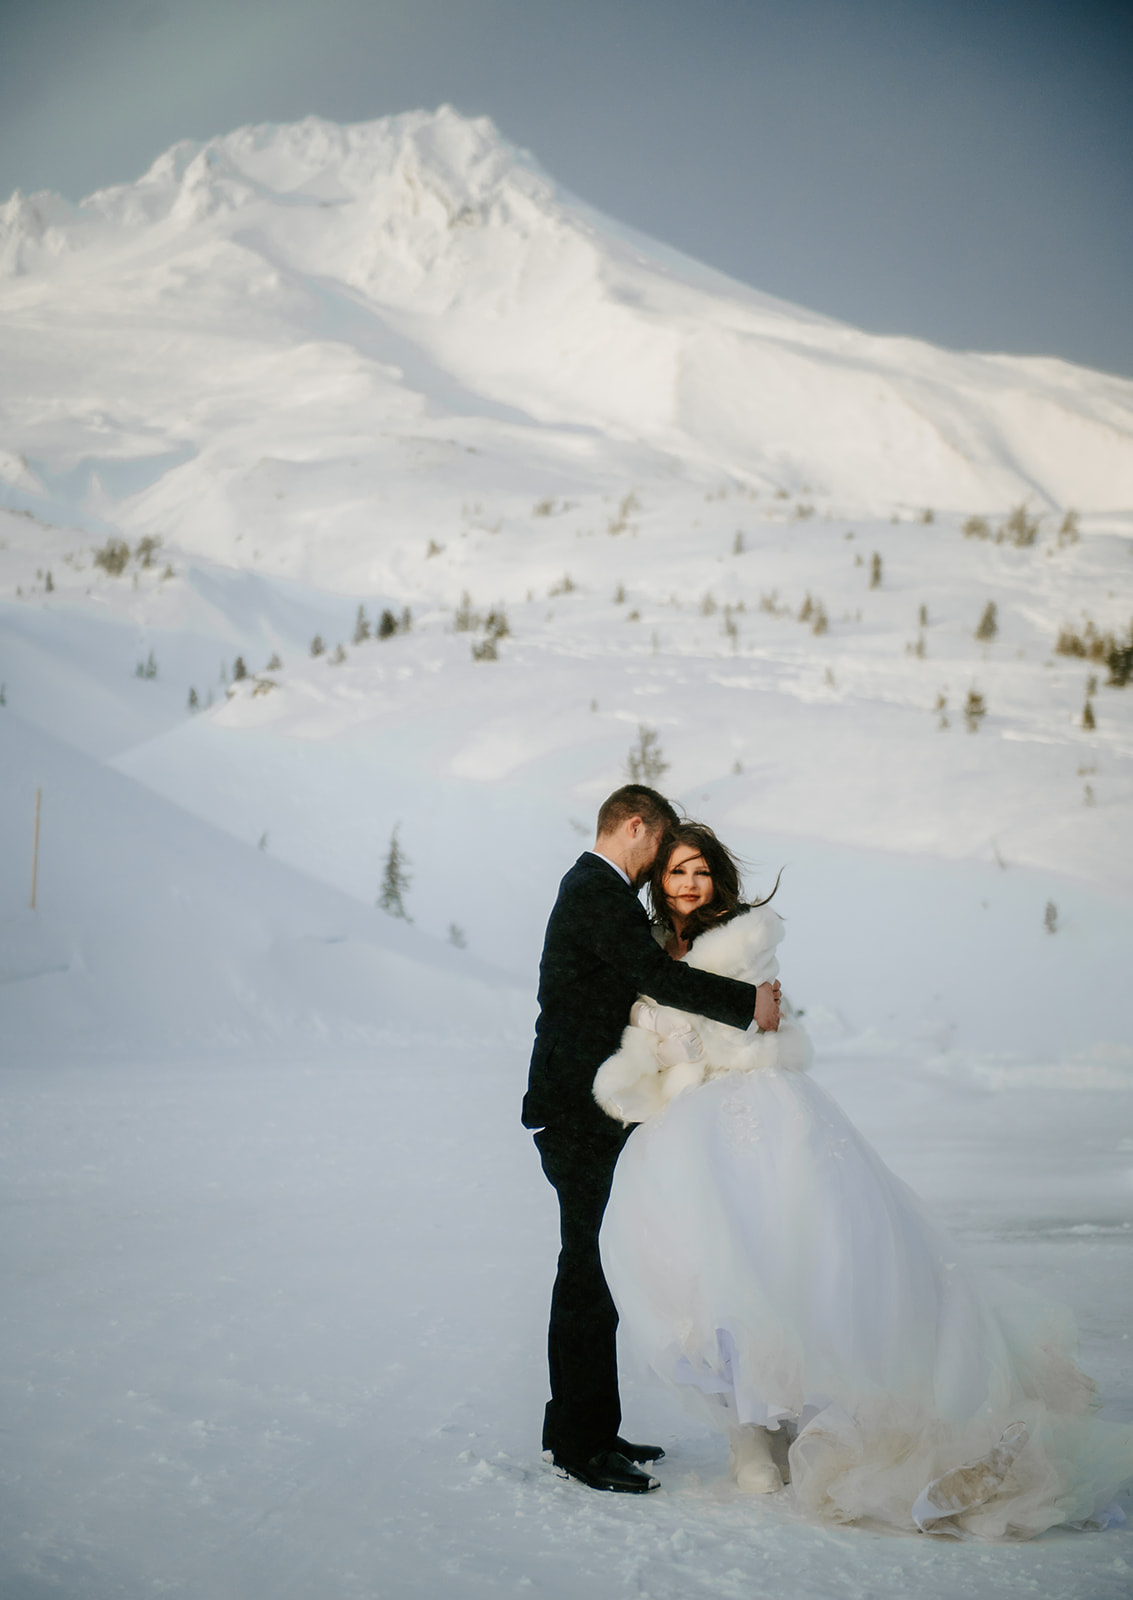 Bride and groom embrace on Mt. Hood during a winter storm on their wedding day.